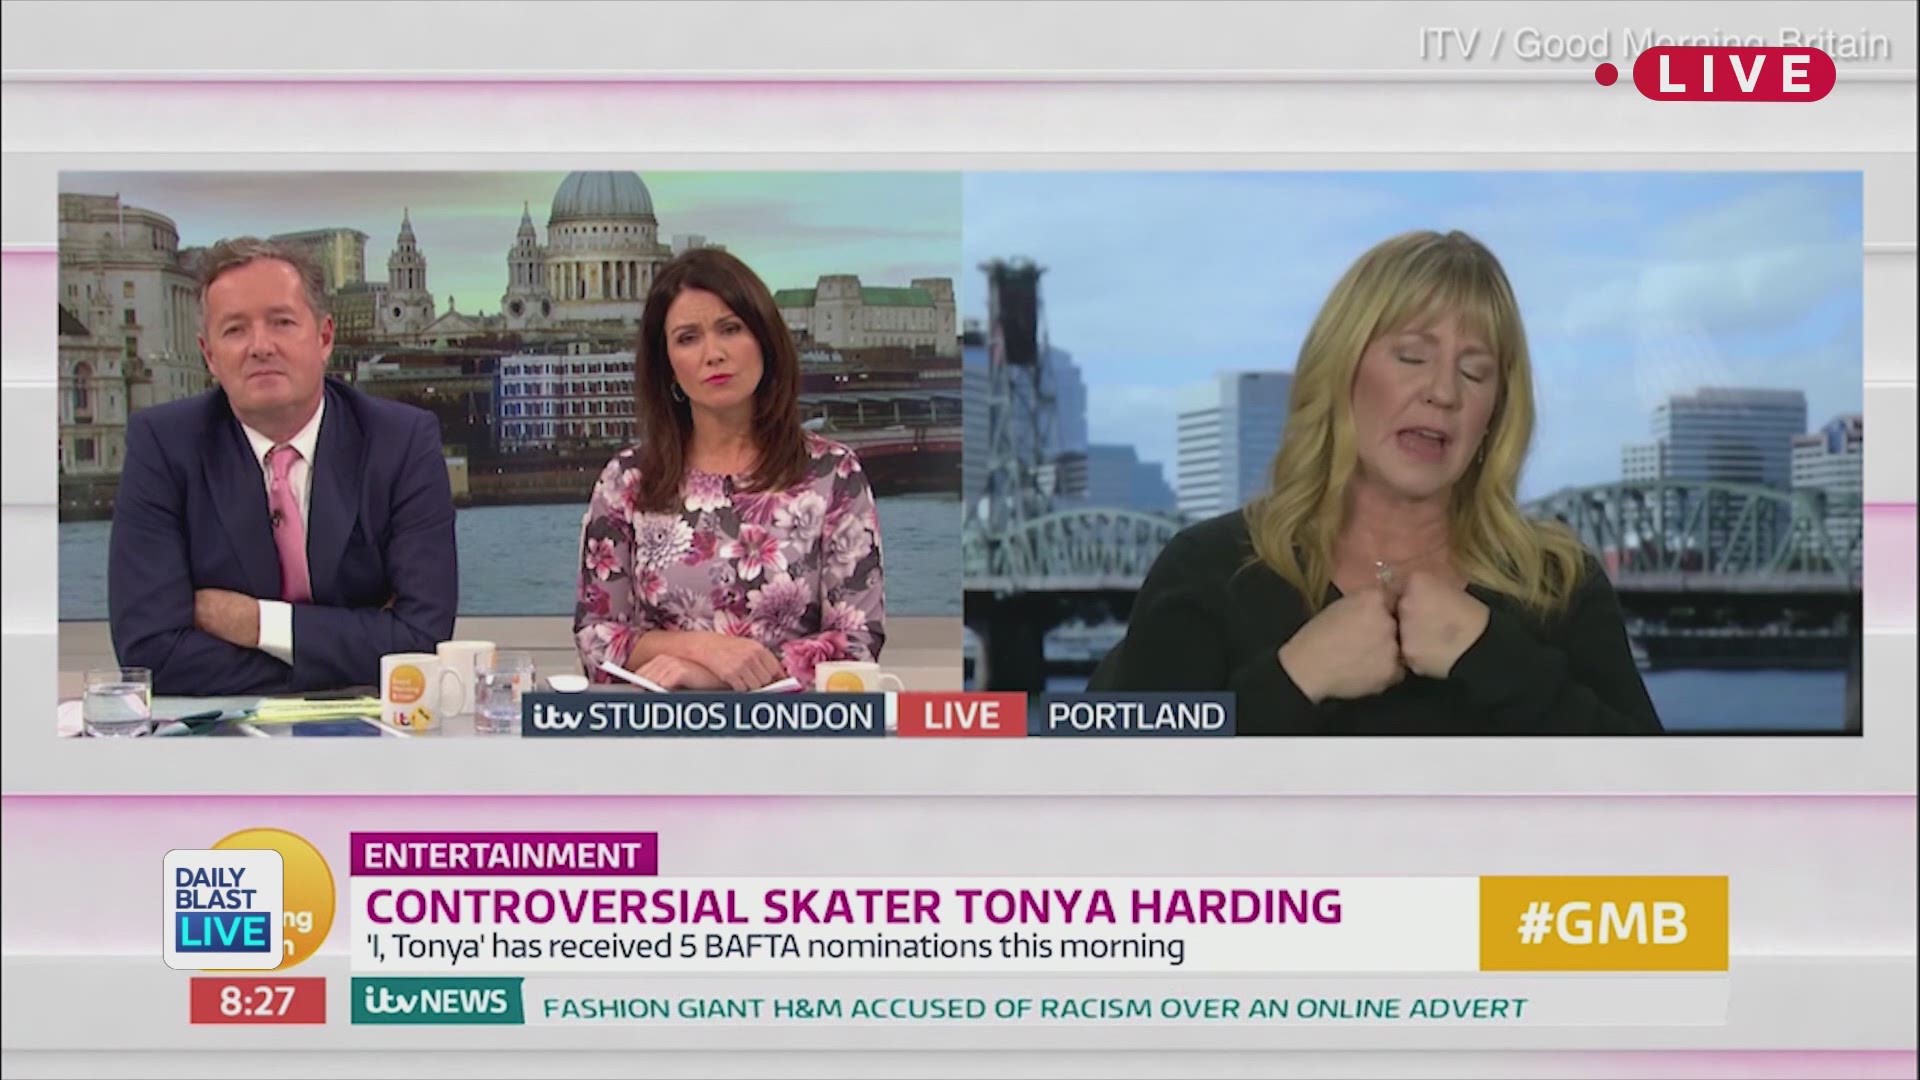 Should Tonya Harding be given a second chance? She joined Good Morning Britain with Piers Morgan but it abruptly ended. Do you think Tonya Harding deserves her second chance? 